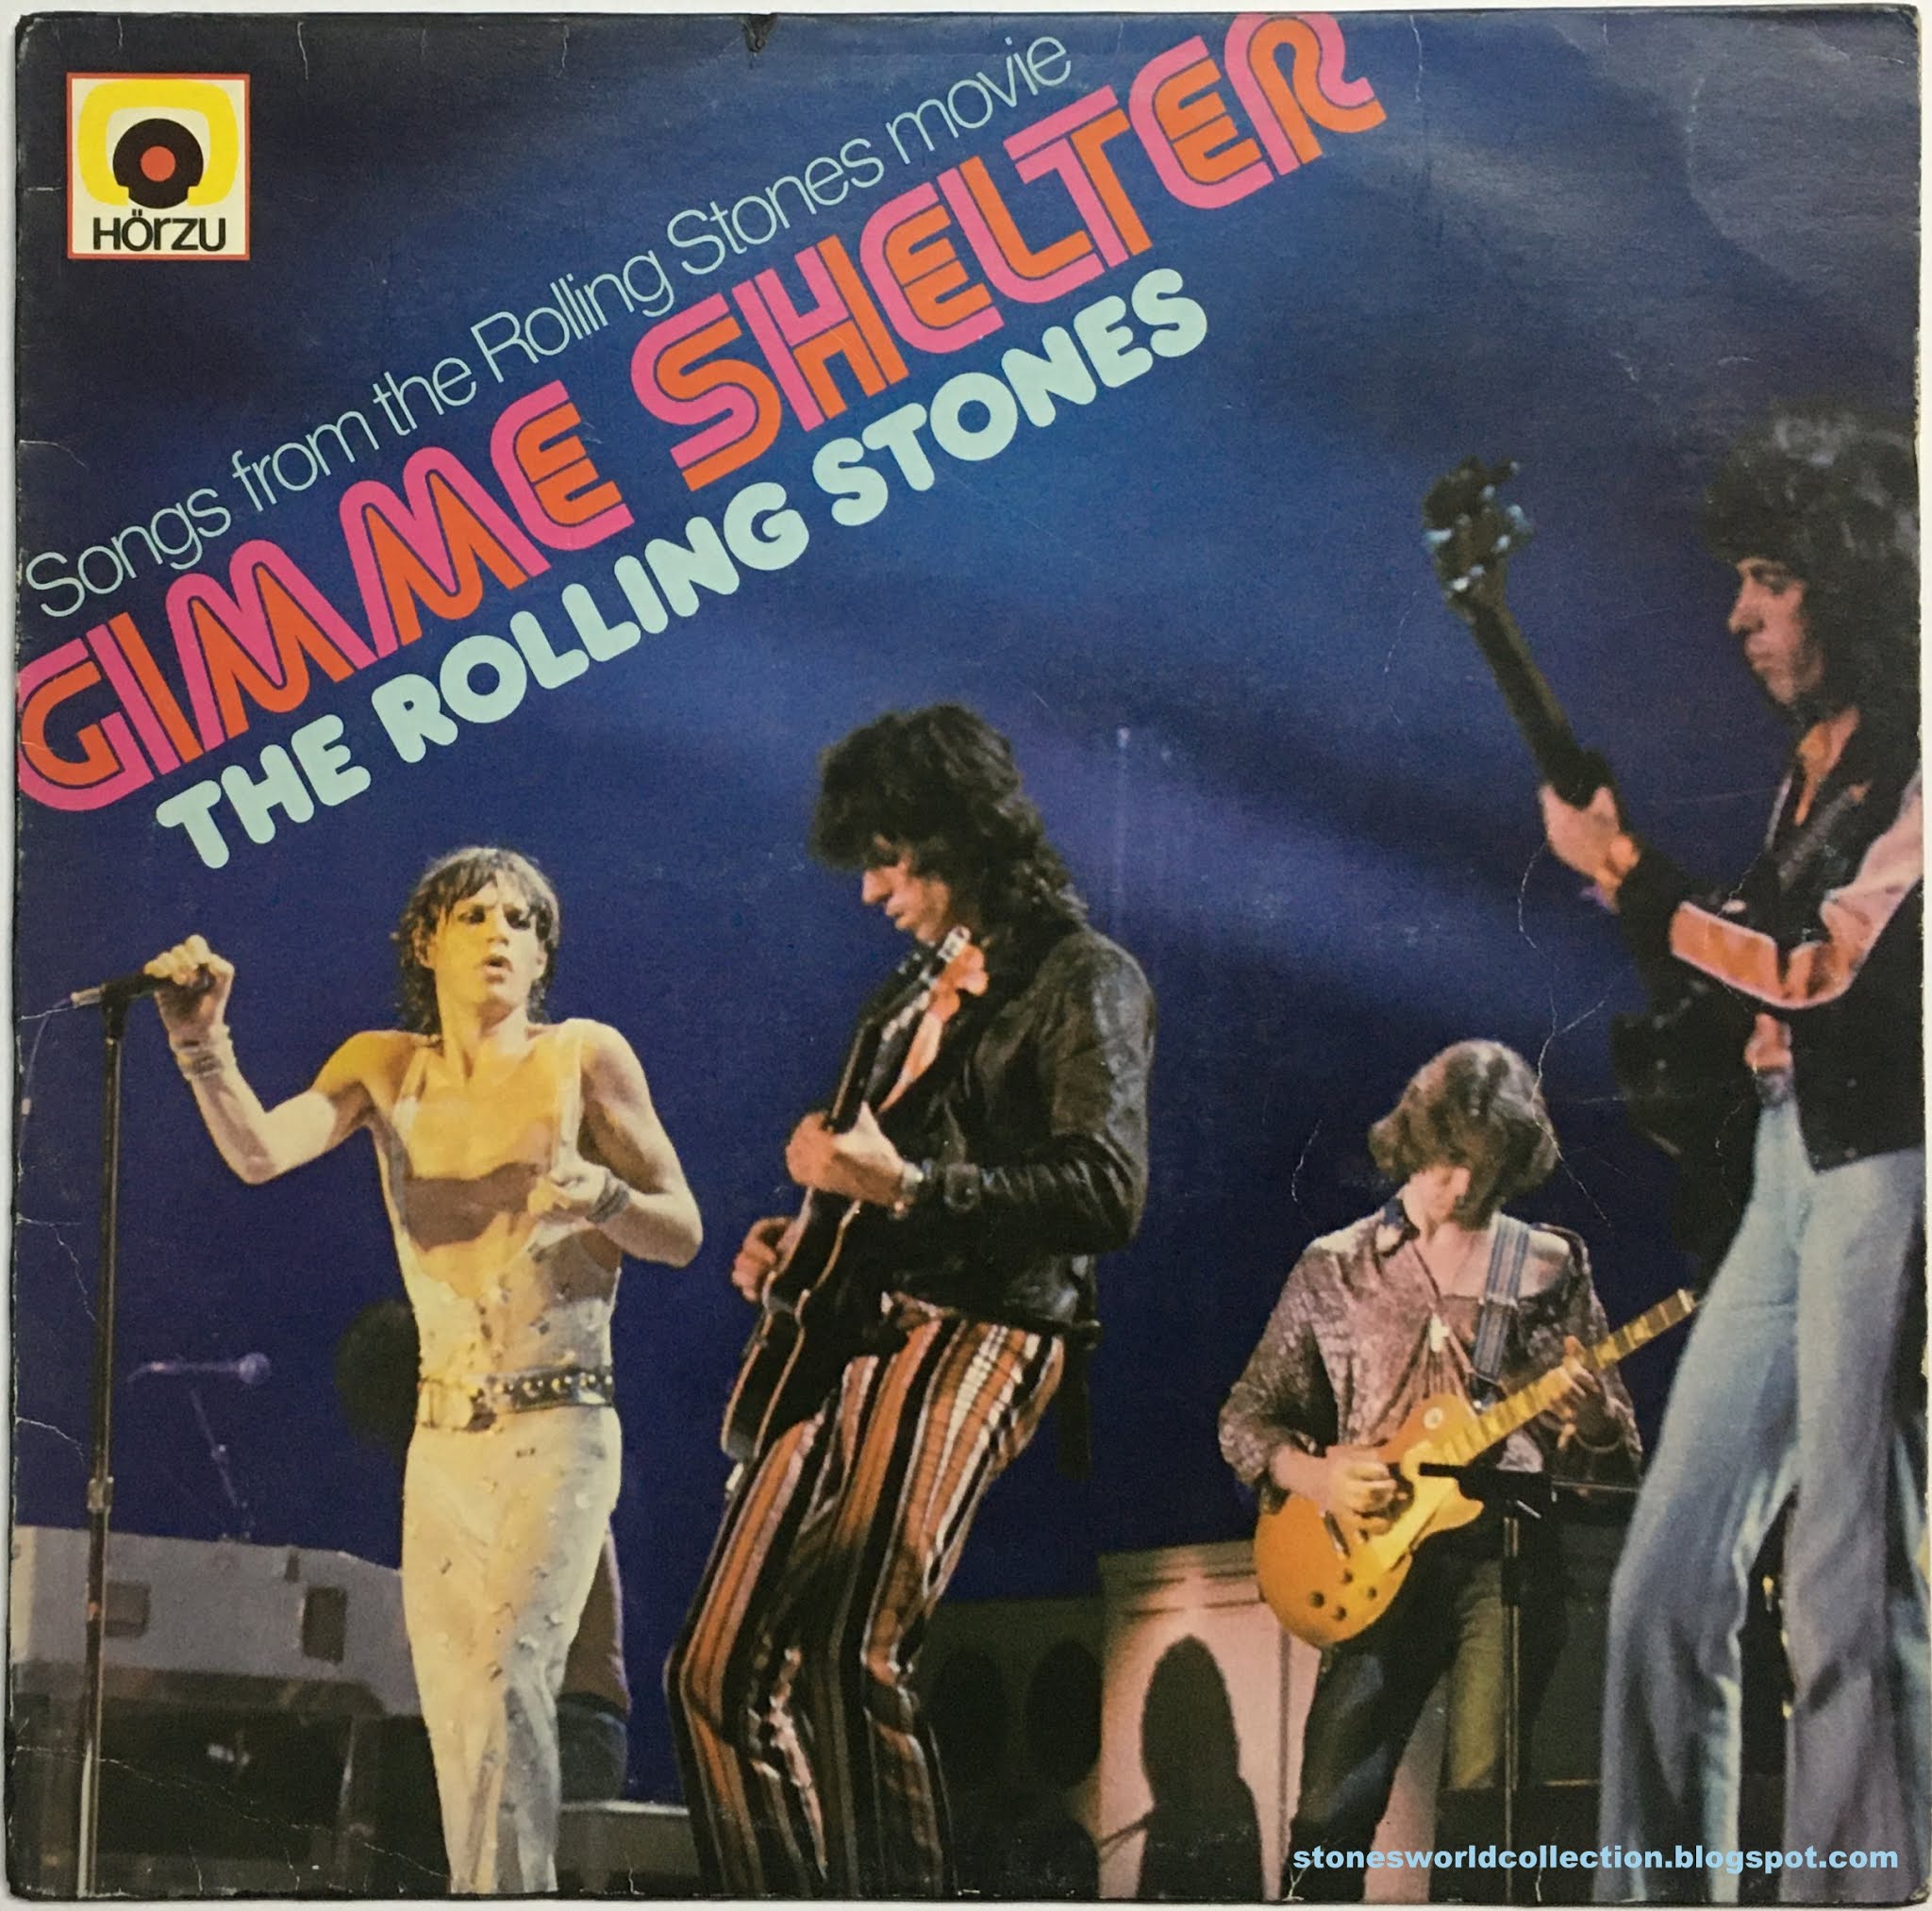 Stones трек. Gimme Shelter 1970. Rolling Stones "Gimme Shelter". R̲olling S̲tones Gimme Shelter. The Rolling Stones Gimme Shelter обложка.